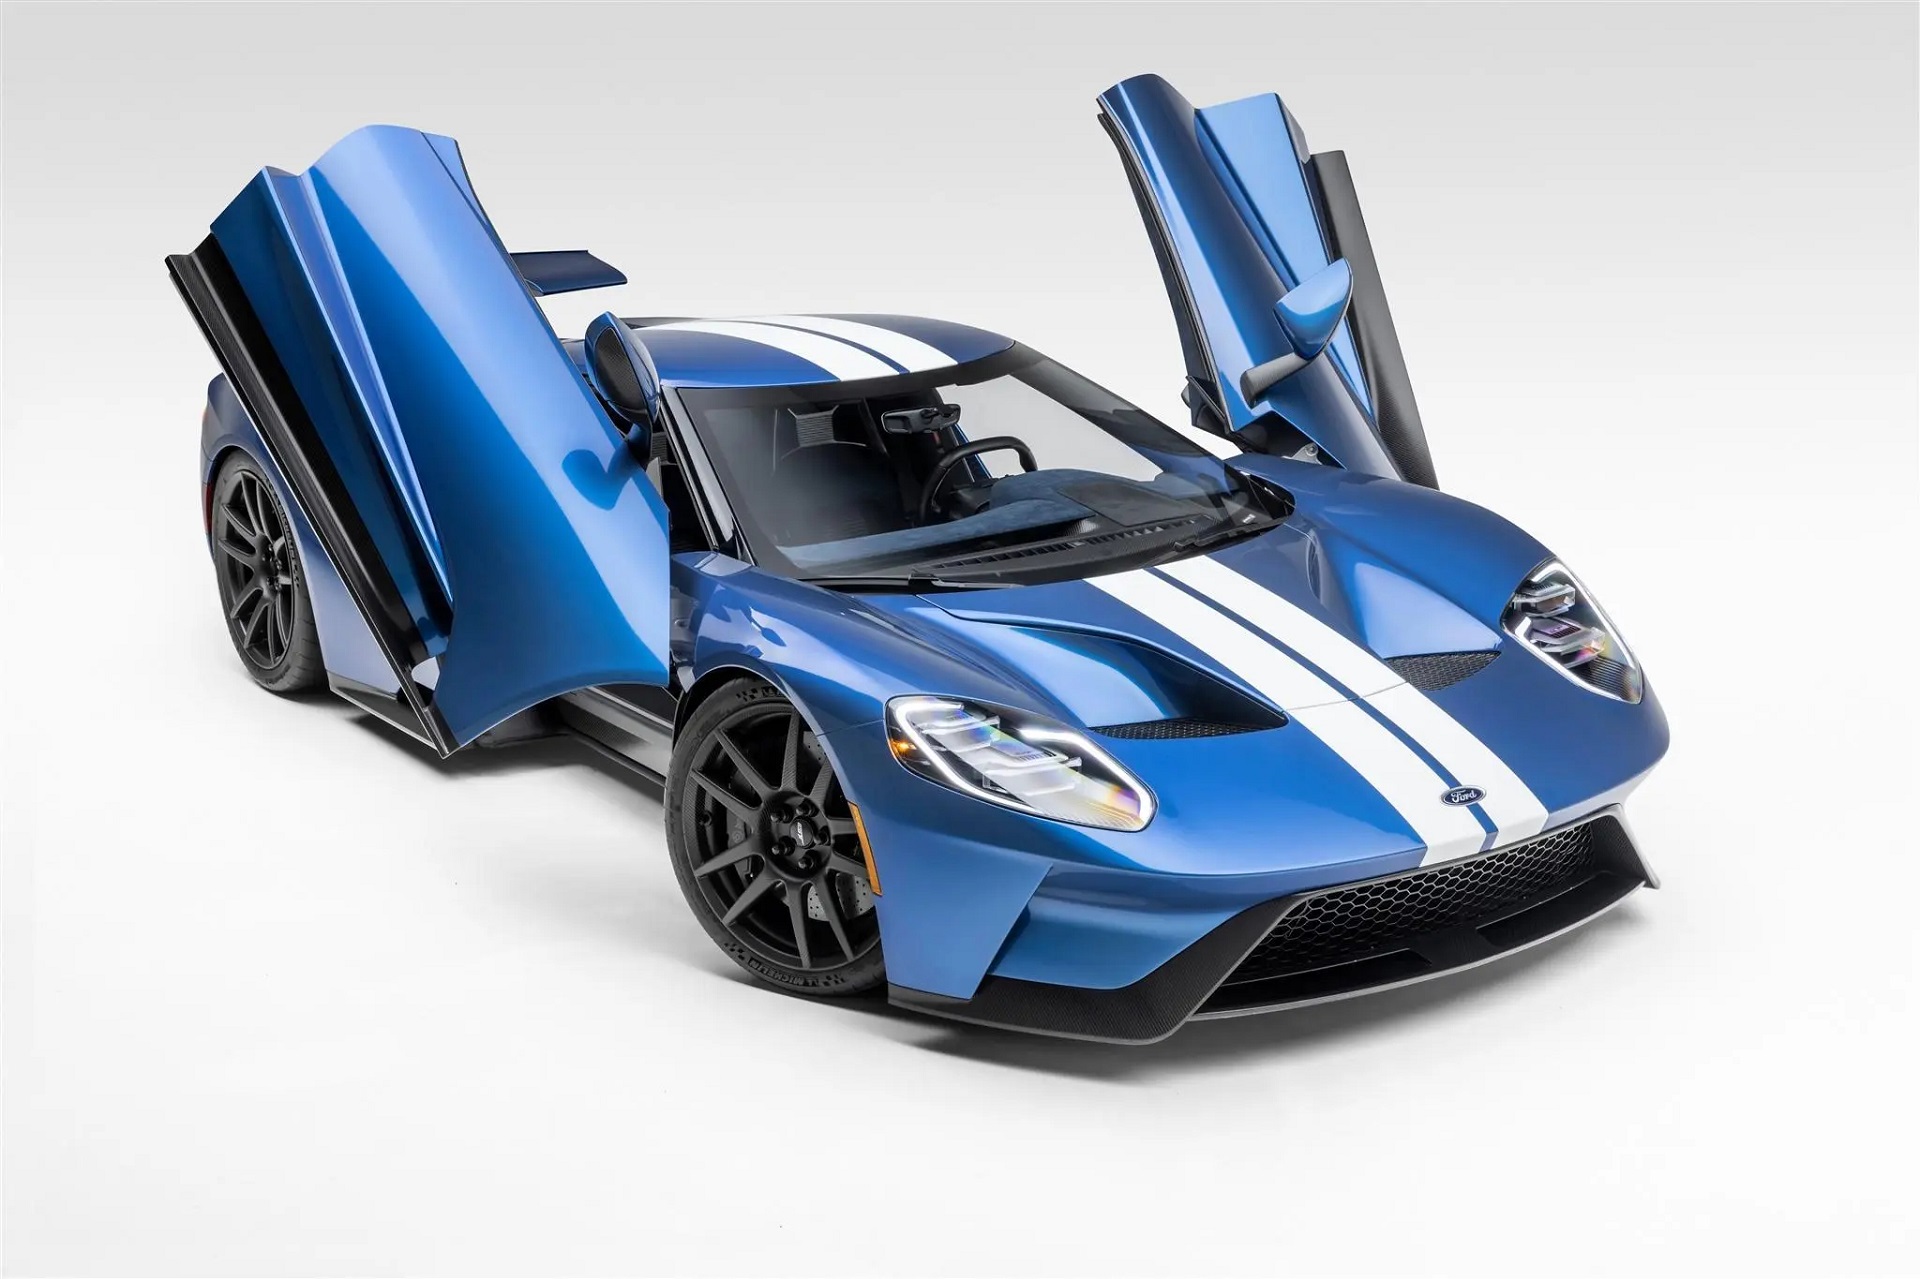 Front-angled view of a 2019 Ford GT with its butterfly doors open.